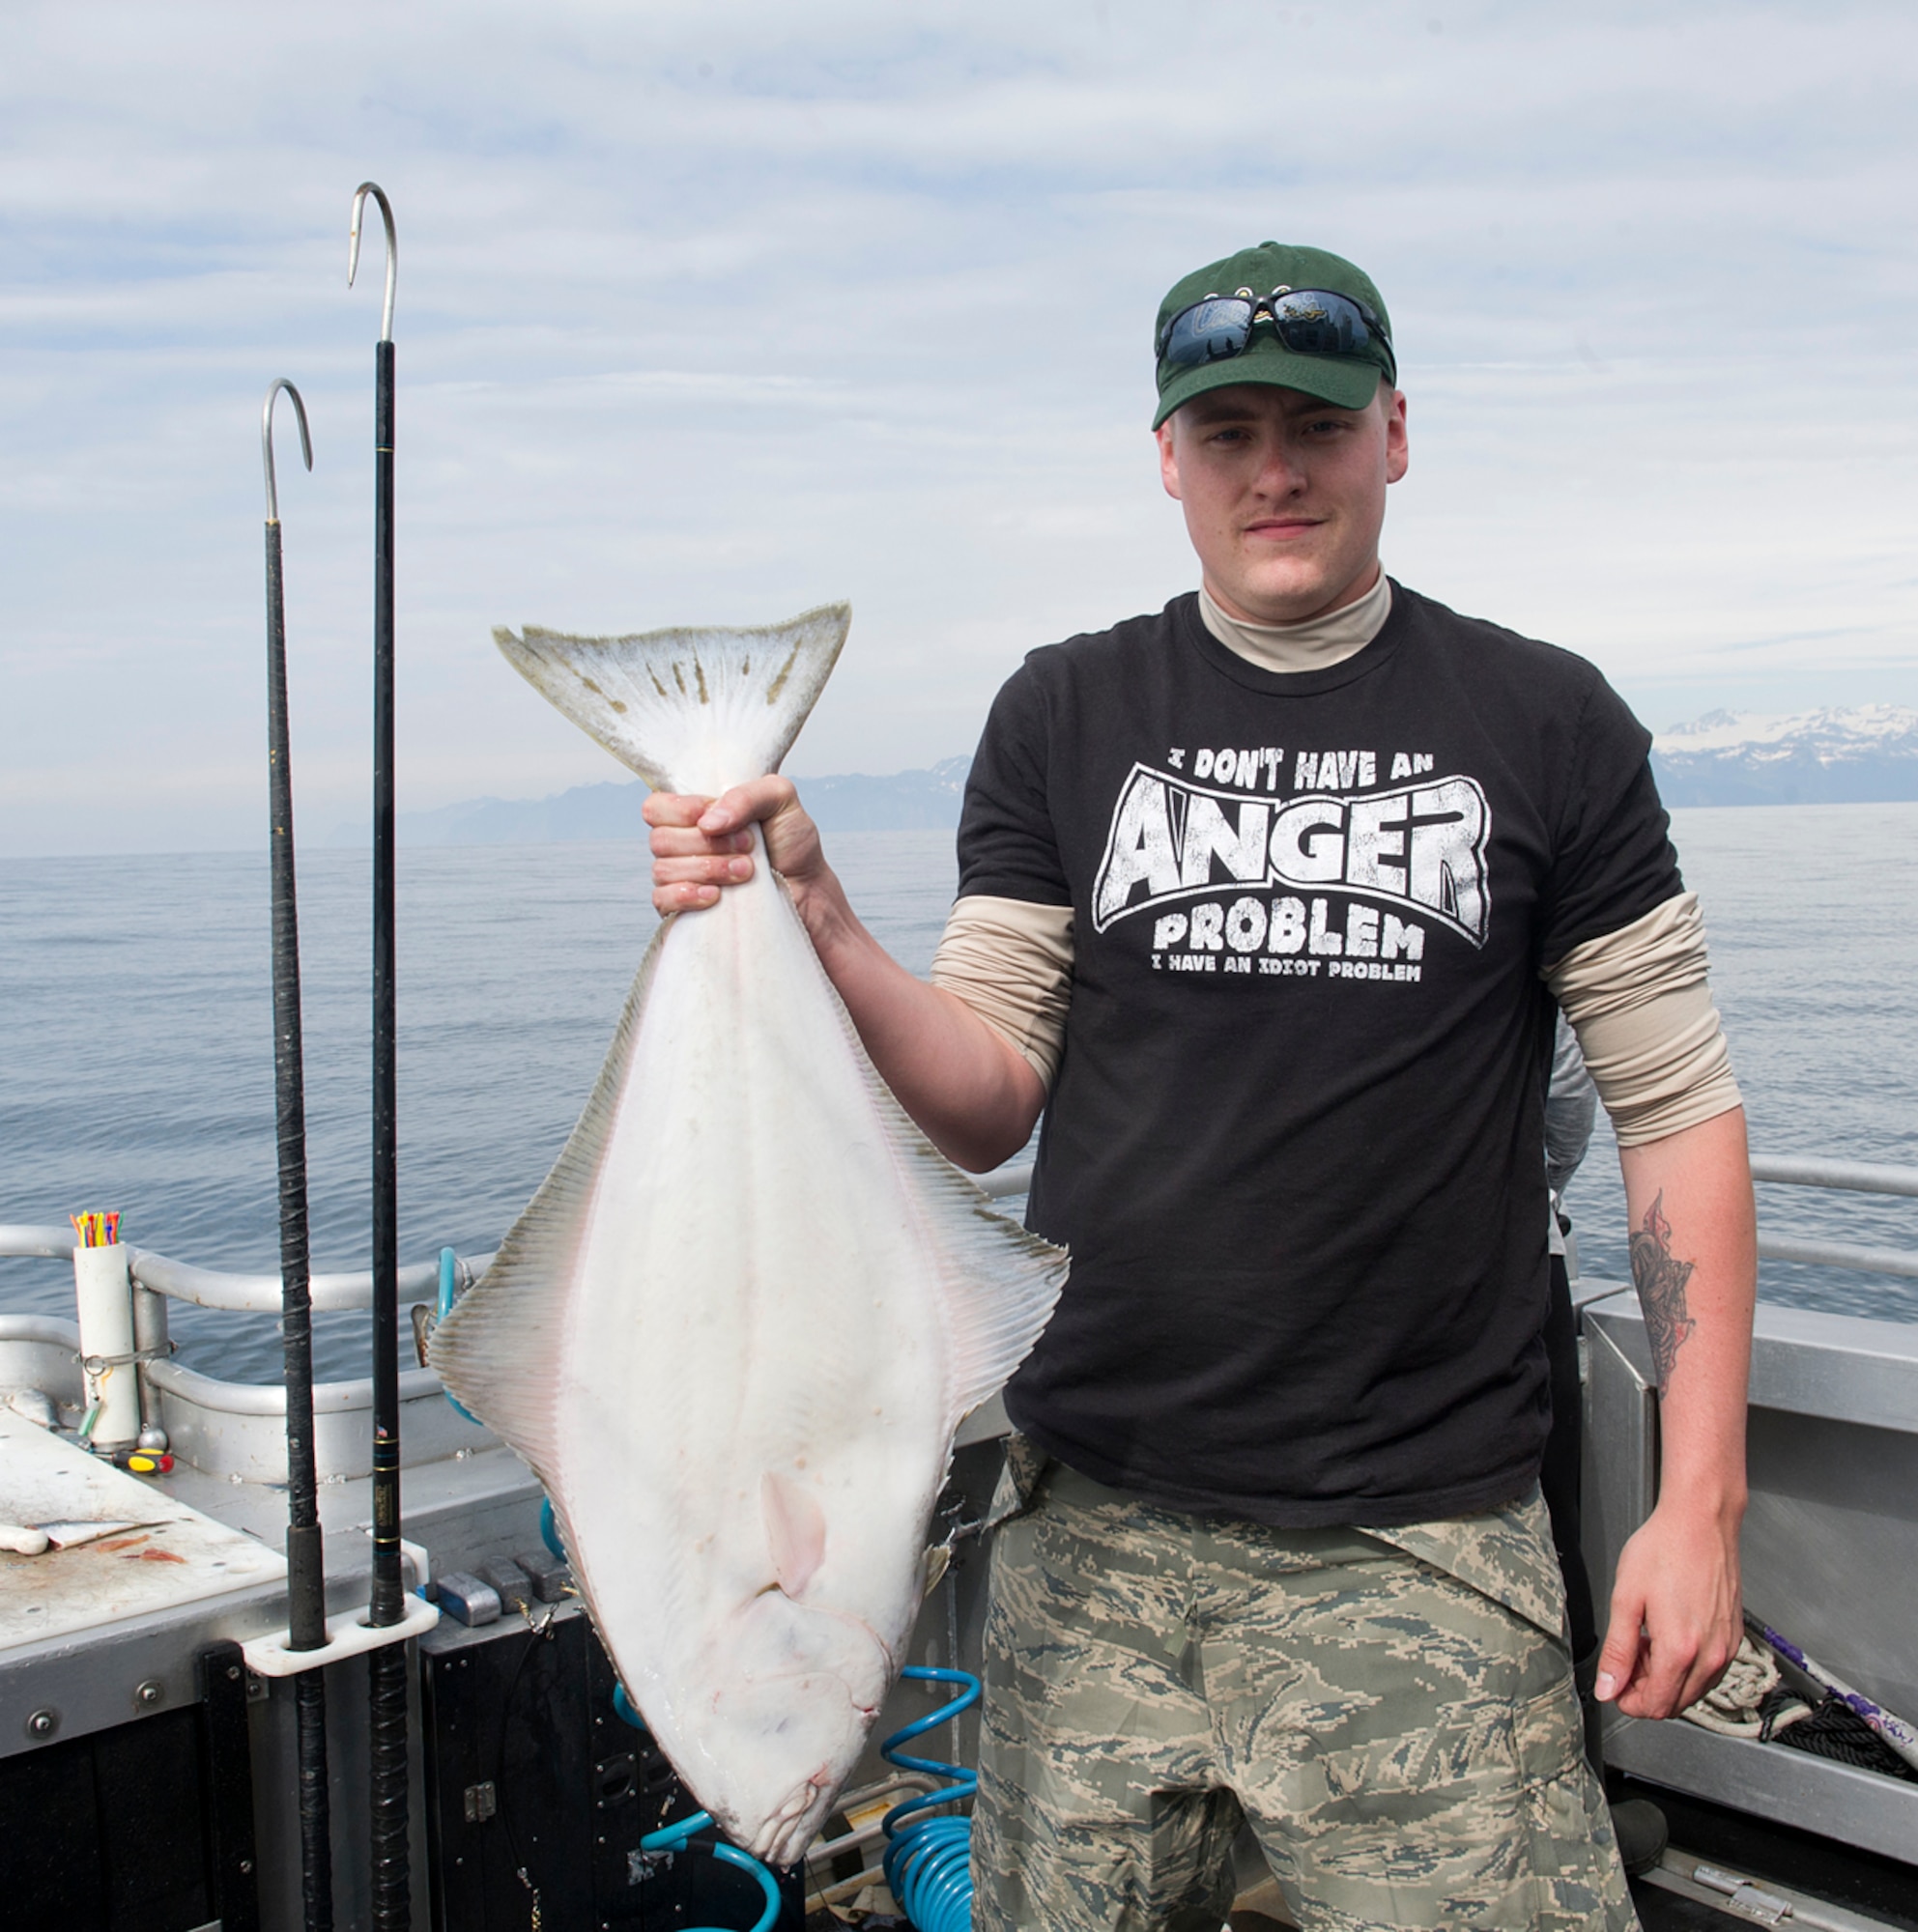 Senior Airman Kyle Griffioen, 703rd Aircraft Maintenance Squadron aerospace propulsions technician, holds a halibut he caught during the Annual Armed Services Combat Fishing Tournament in Seward, Alaska, May 22, 2014. The tournament is put on annually to honor active duty service members who have deployed or are scheduled to deploy. (U.S. Air Force photo/Staff Sgt. Zachary Wolf)